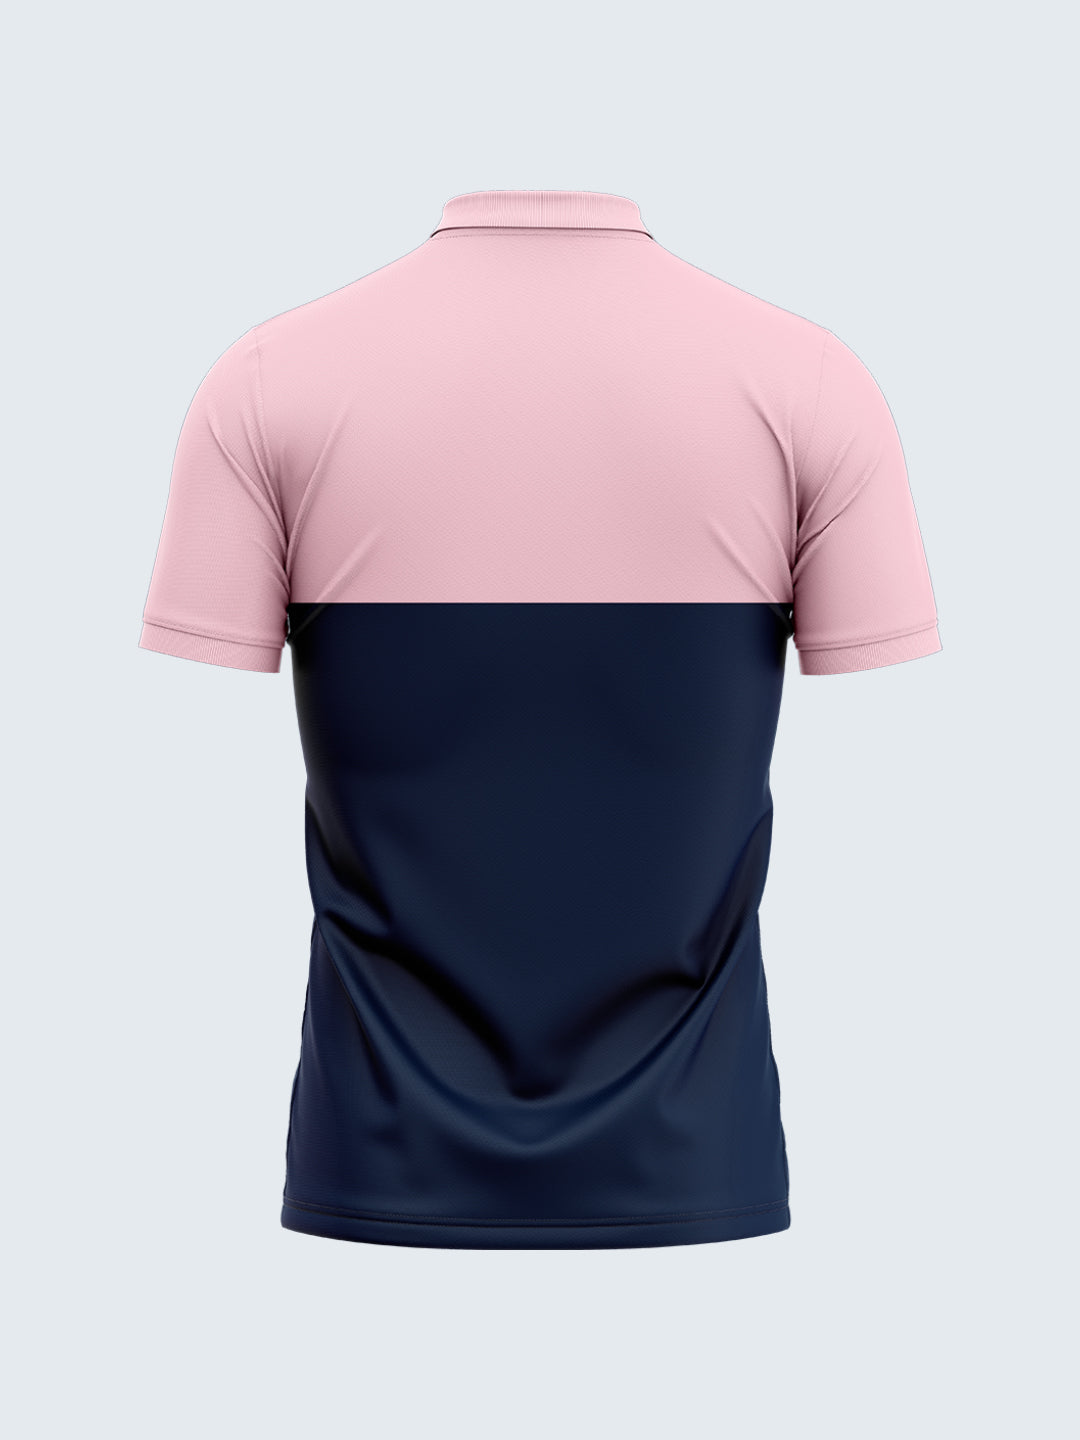 Customise Tennis Polo T-Shirt - 2131PK - Front